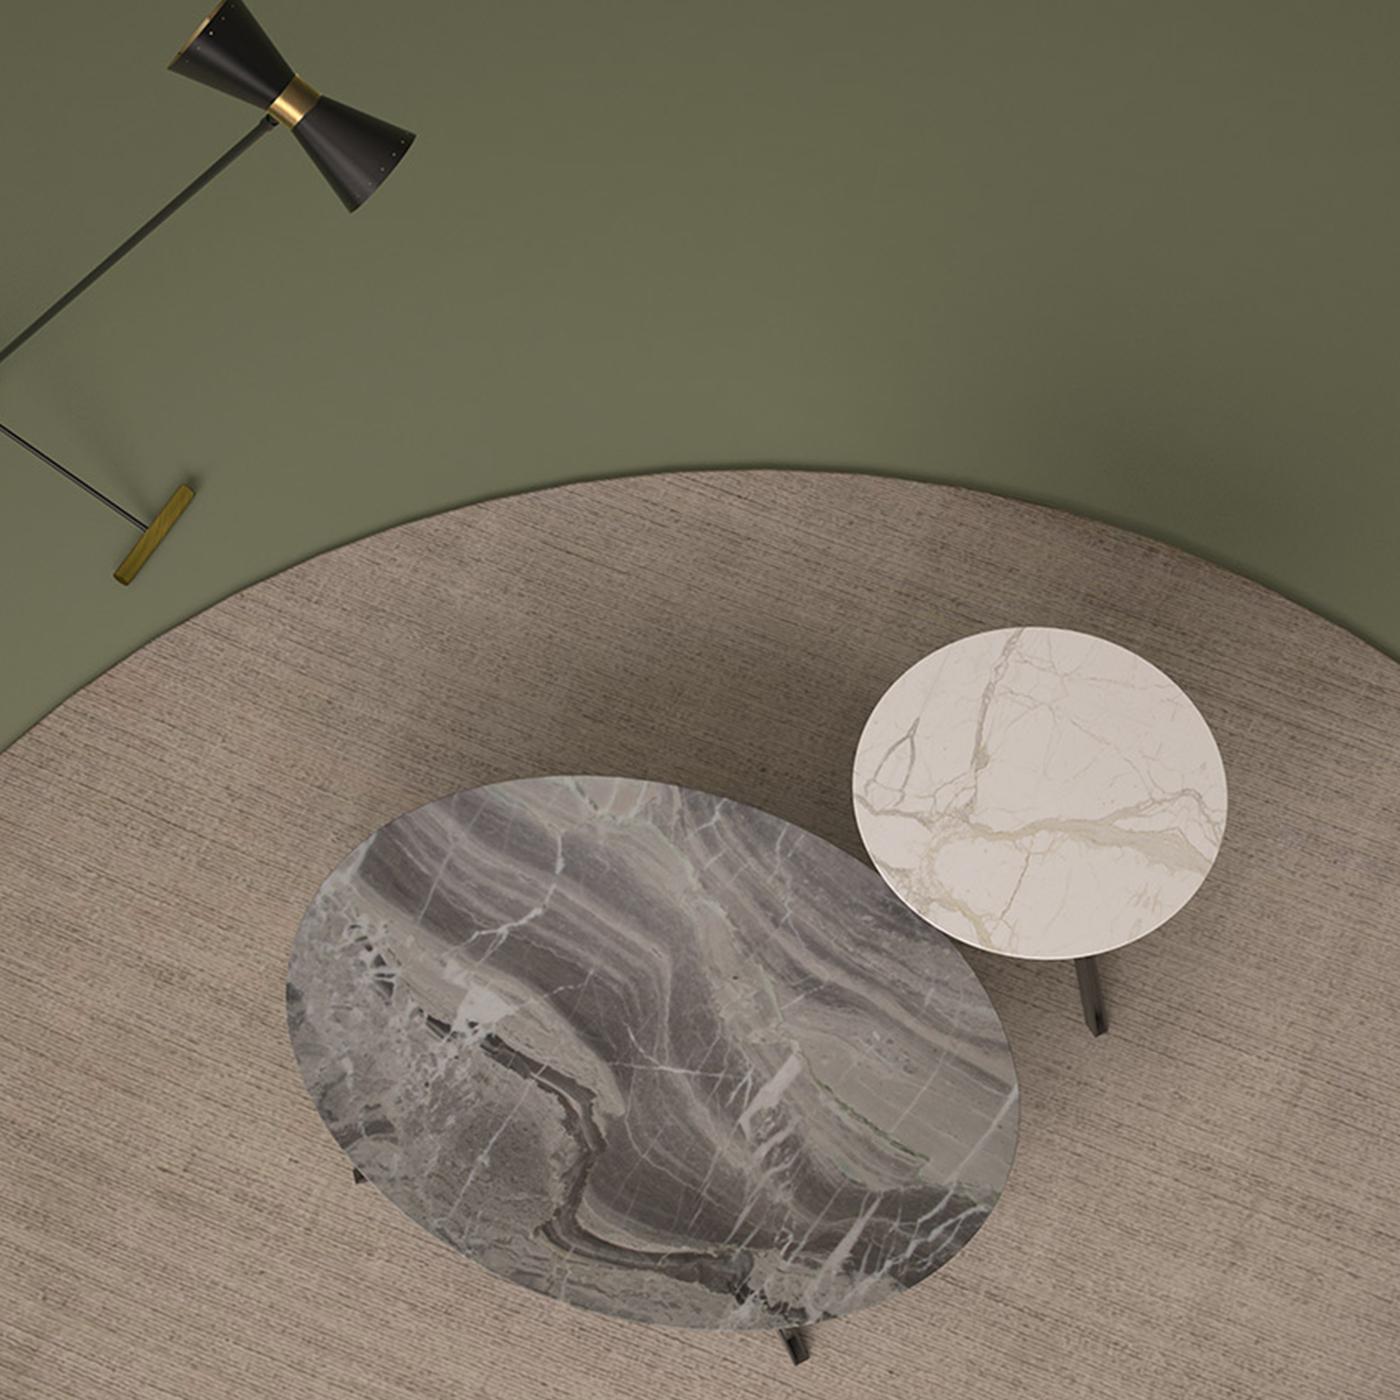 These two splendid coffee tables are supported by a base in steel and boast tops extracted in the Cornalita quarry in the village of Camerata Cornello in the Brembo Valley. The large one (82 x 120 x 30 cm) is in Orobico gray marble with a dark